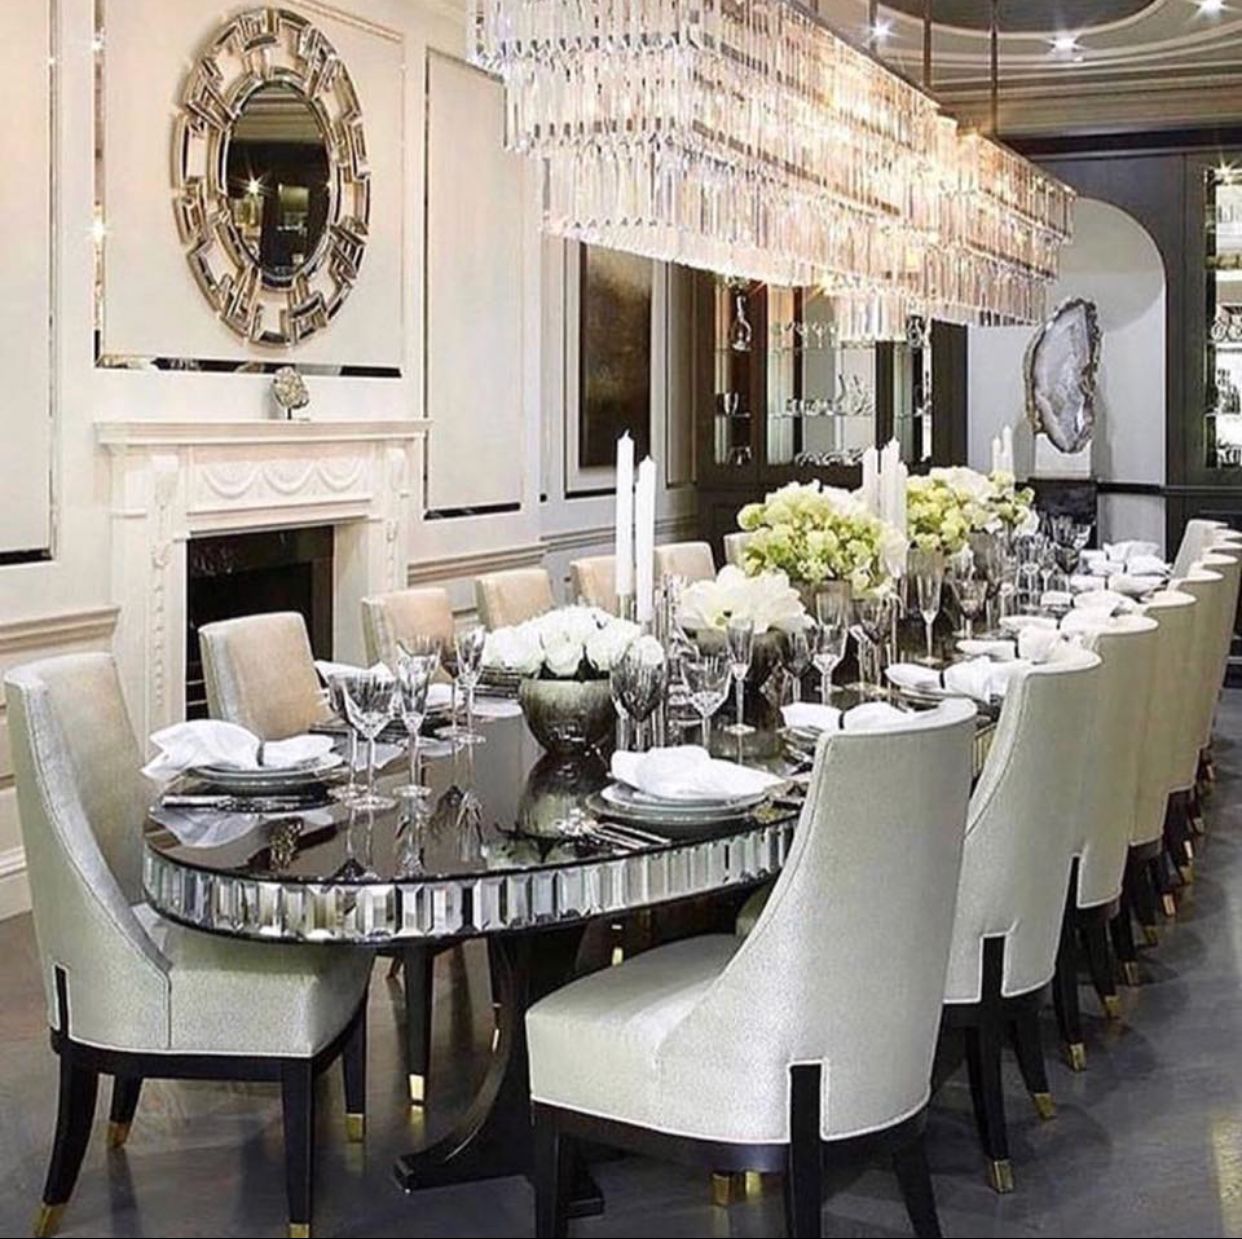 Dining room victorian style luxury gold opulent rooms royalty furniture stunning way